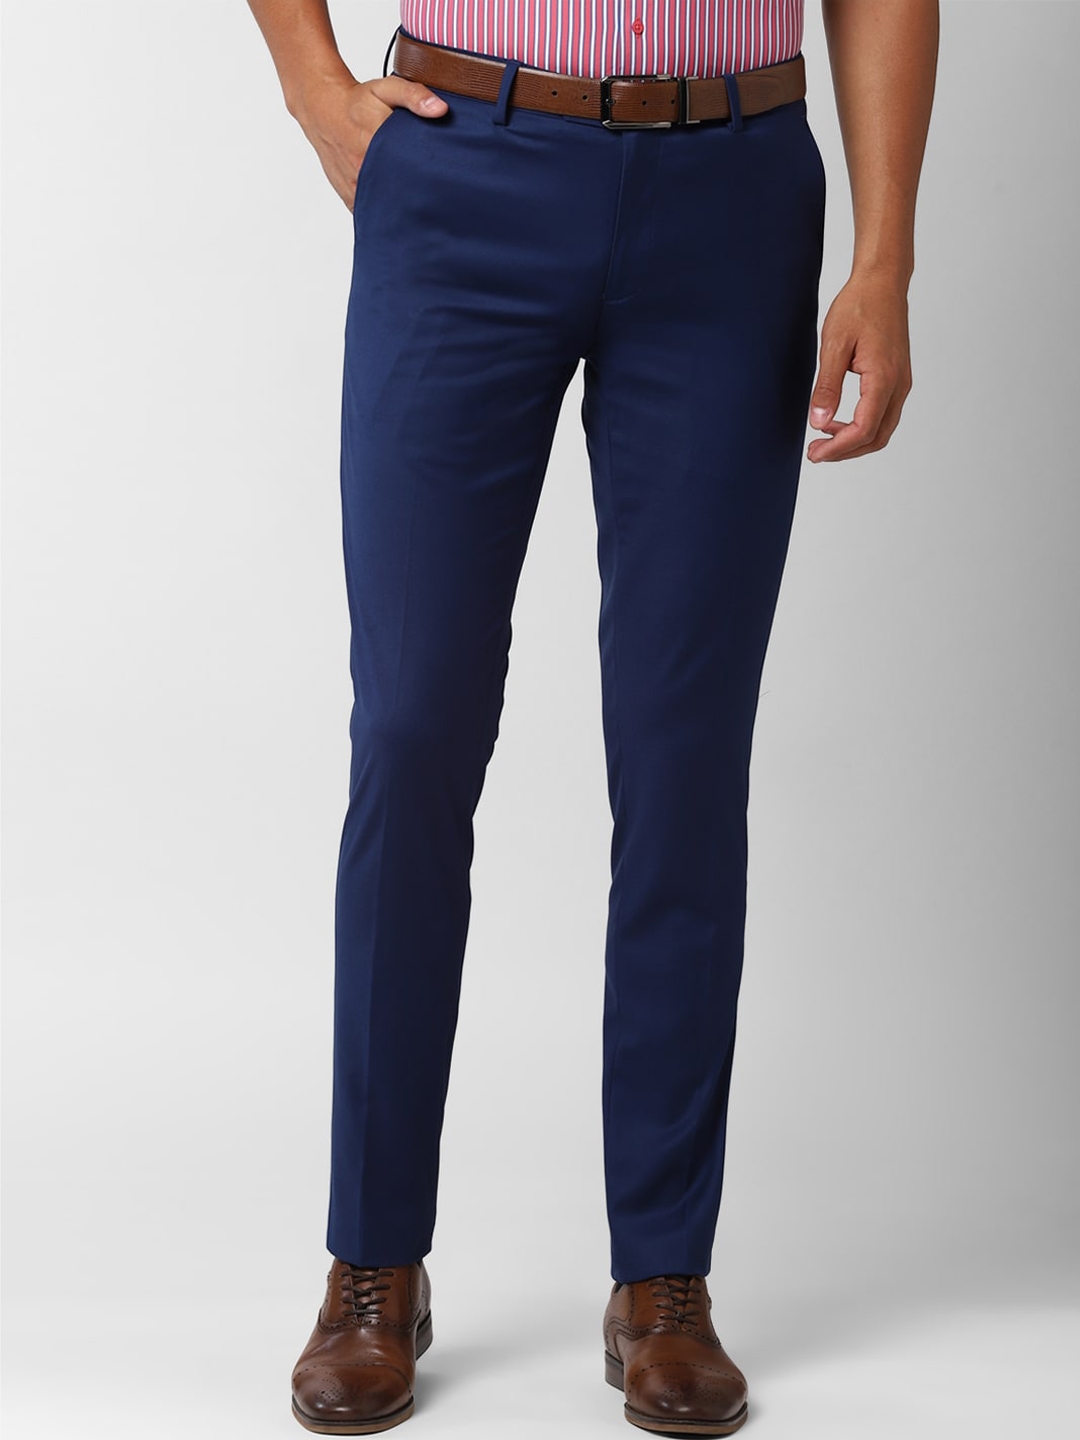 Buy Navy Blue Trousers online in India  Hirawats